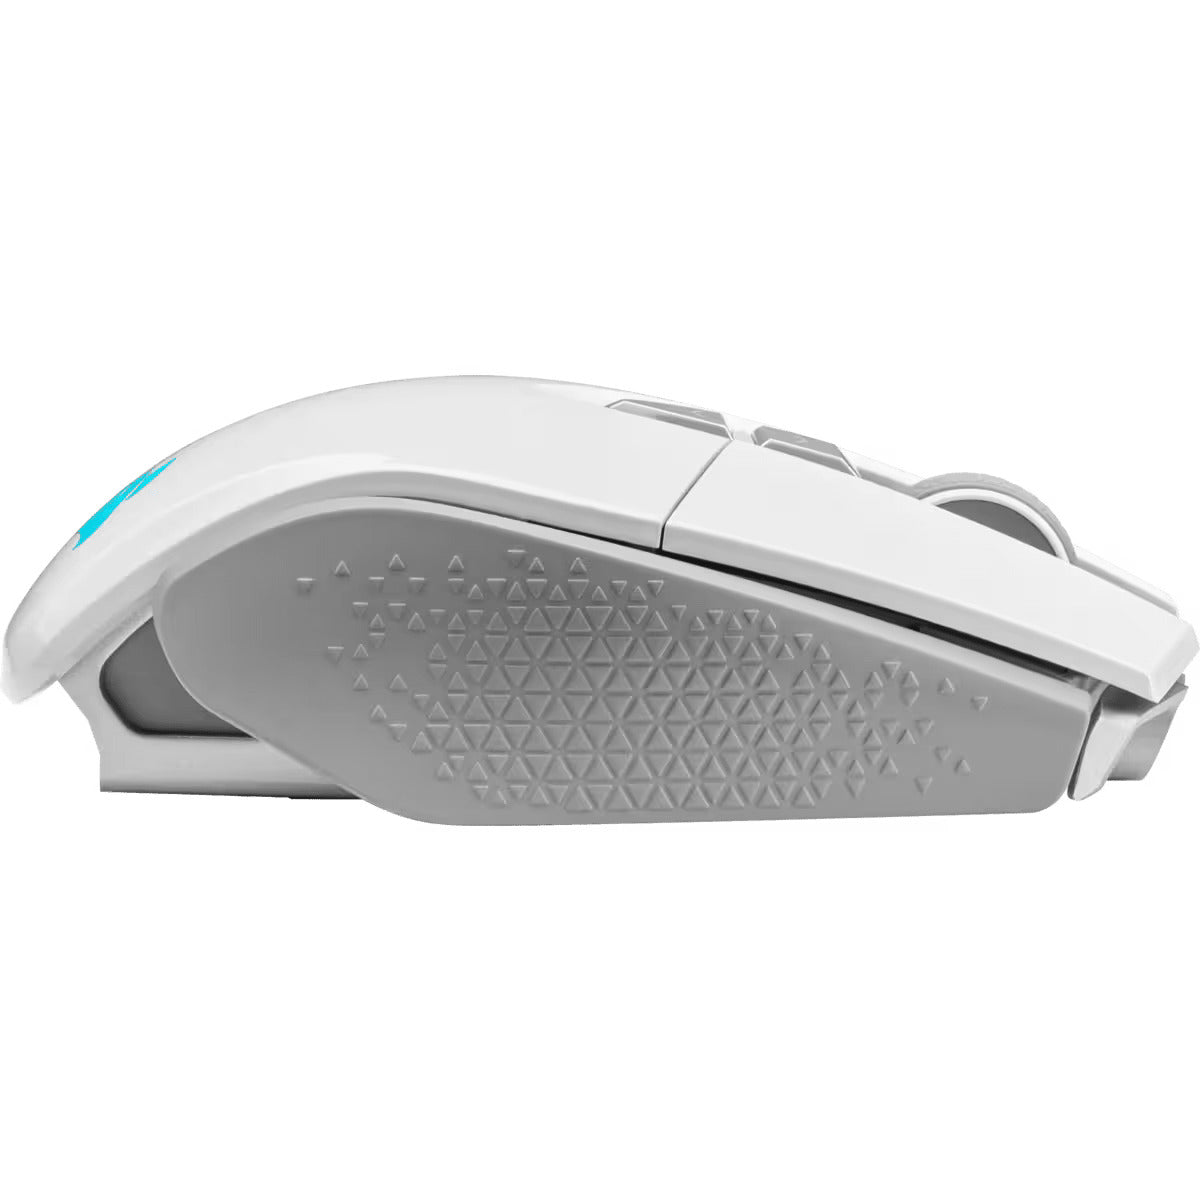 CORSAIR M65 iCUE RGB Ultra 26,000 DPI Tunable FPS Wireless Gaming Mouse with Adjustable Weights, 8 Programmable Buttons, Wired, BT and Slipstream Connectivity and 120Hrs Max Battery Life (Black, White) | CH-9319411-AP2 CH-9319511-AP2